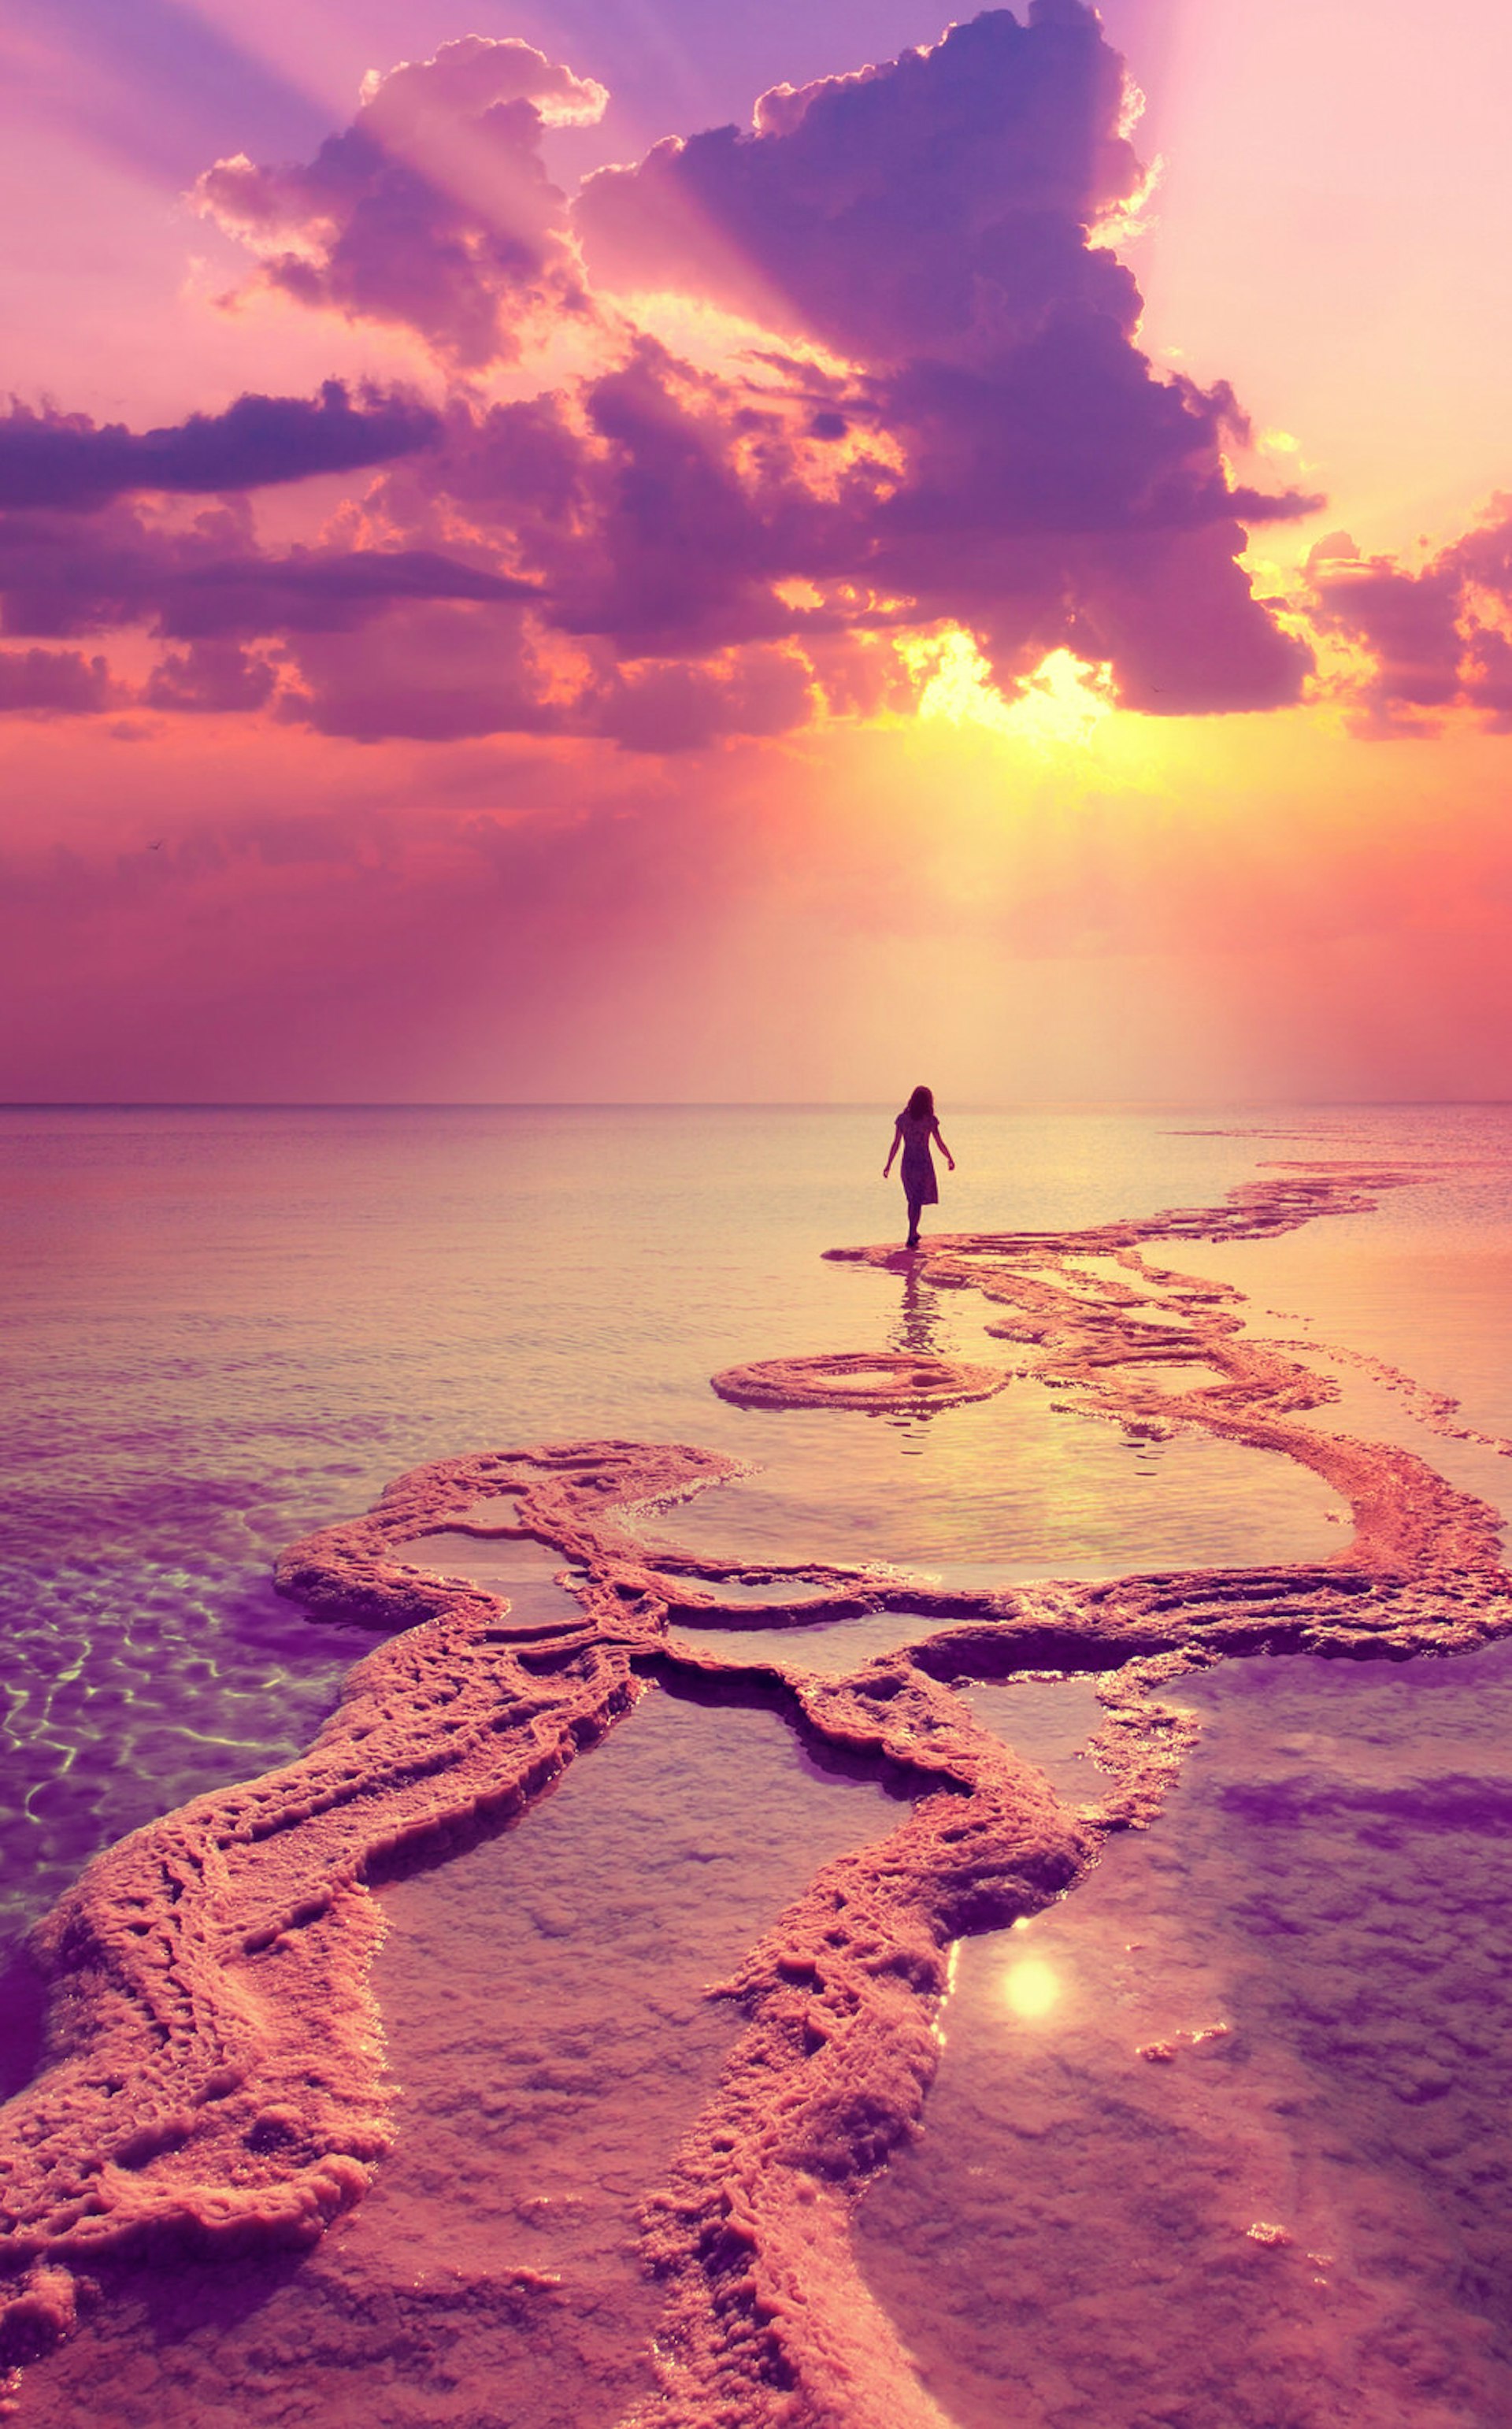 Silhouette of young woman walking on Dead Sea. Image by vvvita / Shutterstock